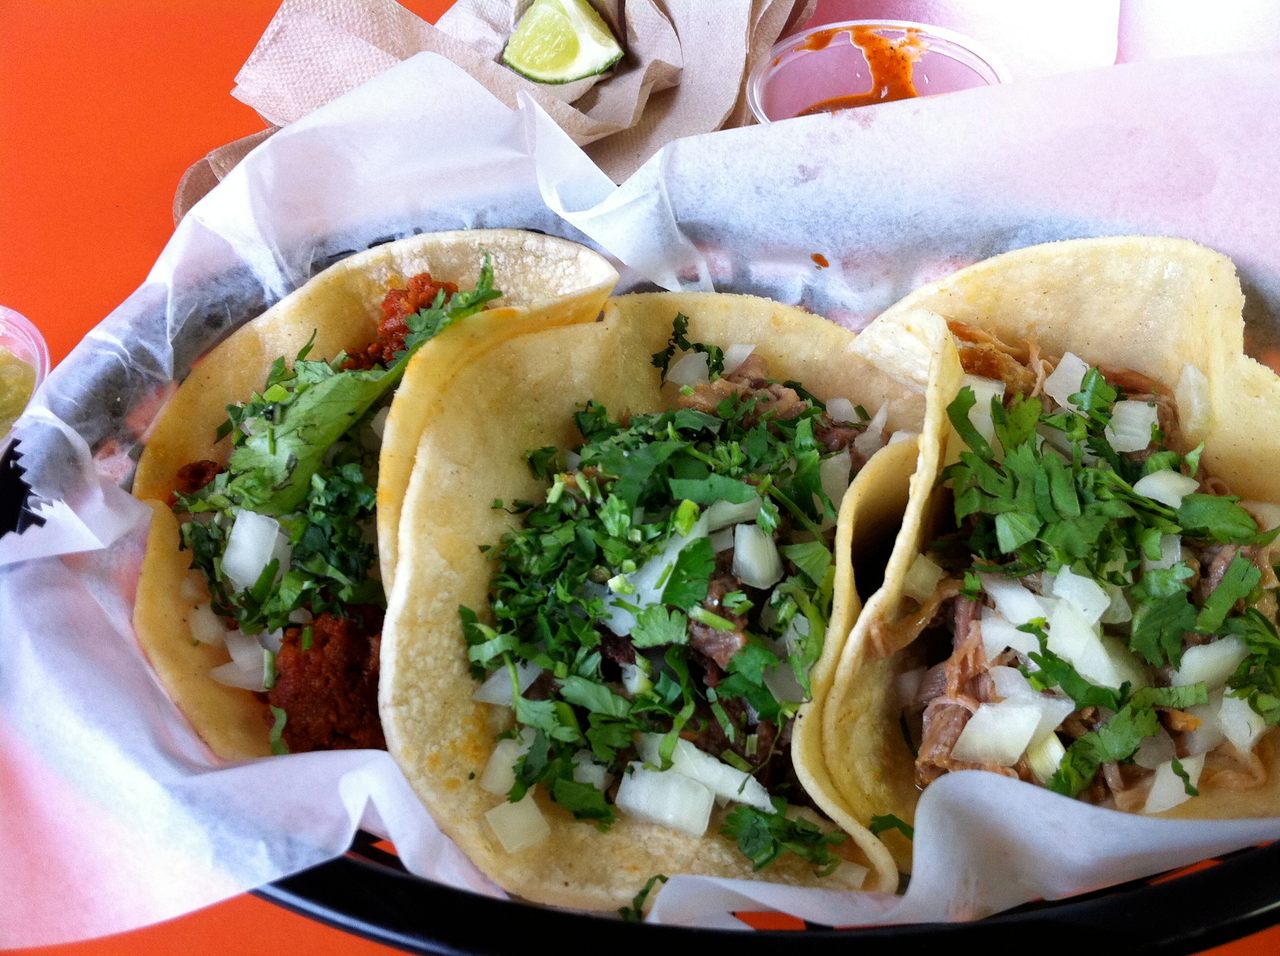 Tuesday is for tacos.